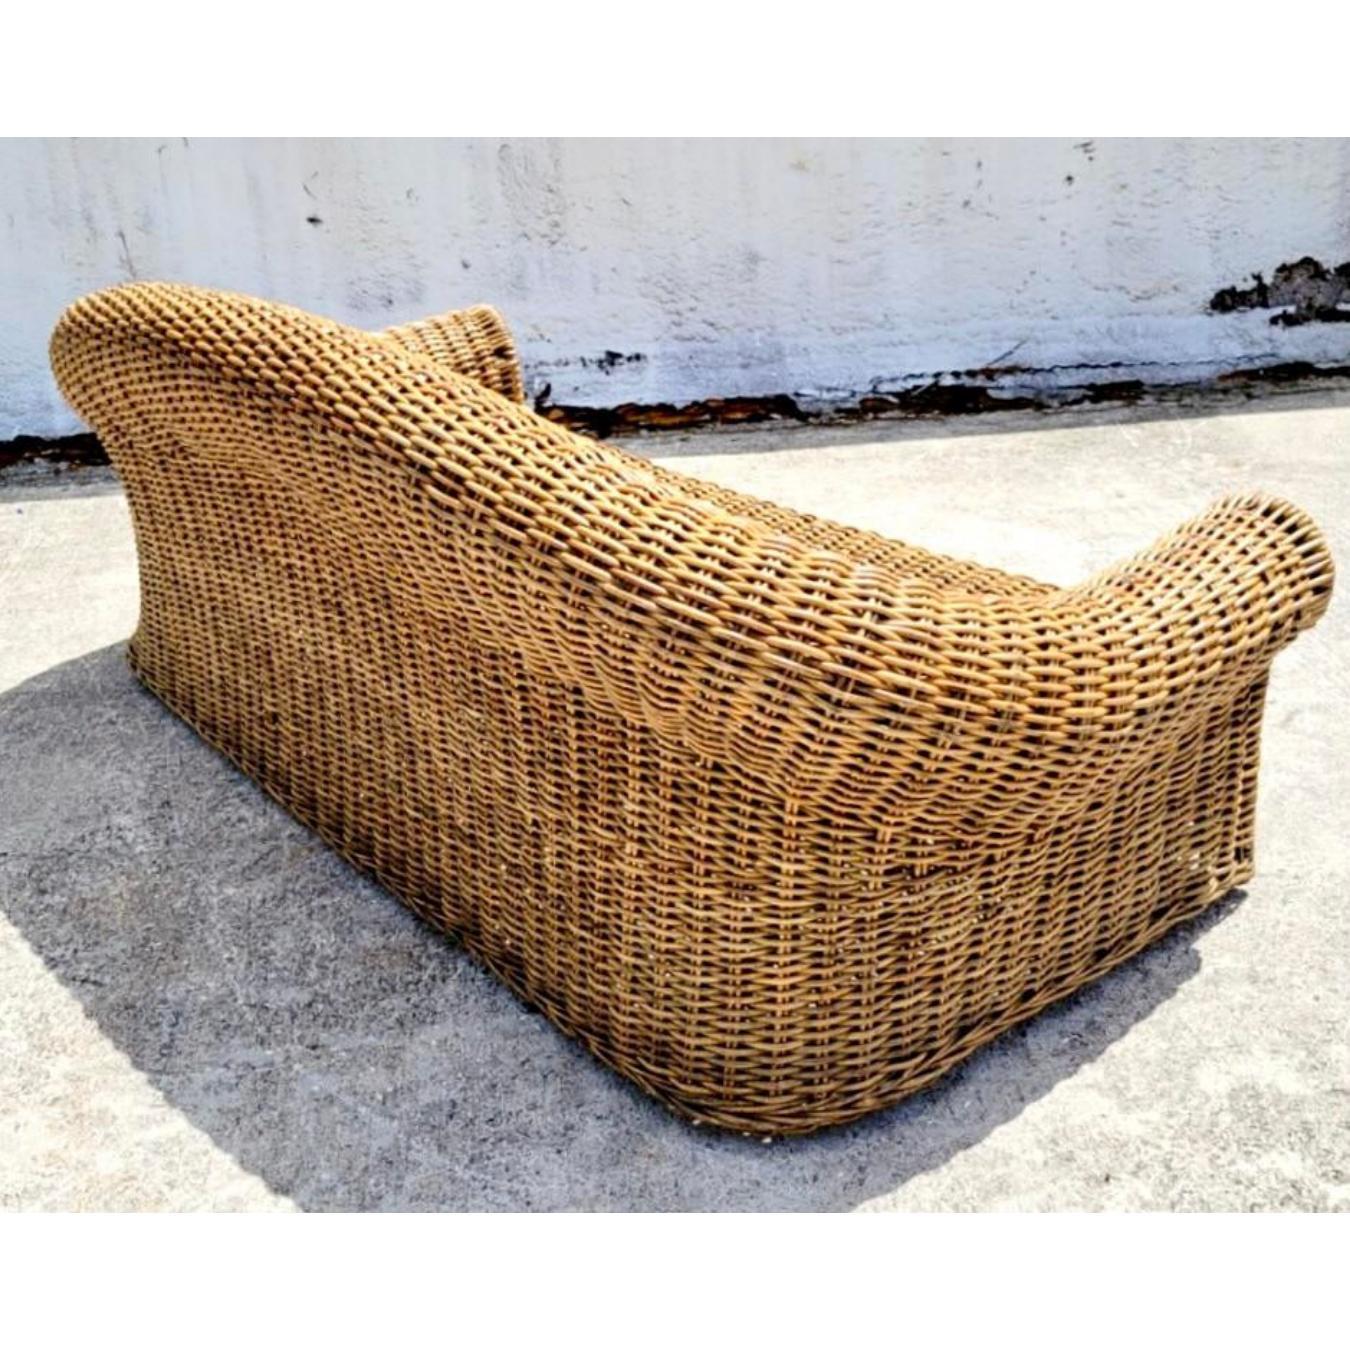 Fantastic vintage woven rattan sofa. An extra large frame with deep seats and an exaggerated roll back. Cushion included. Acquired from a Miami estate.